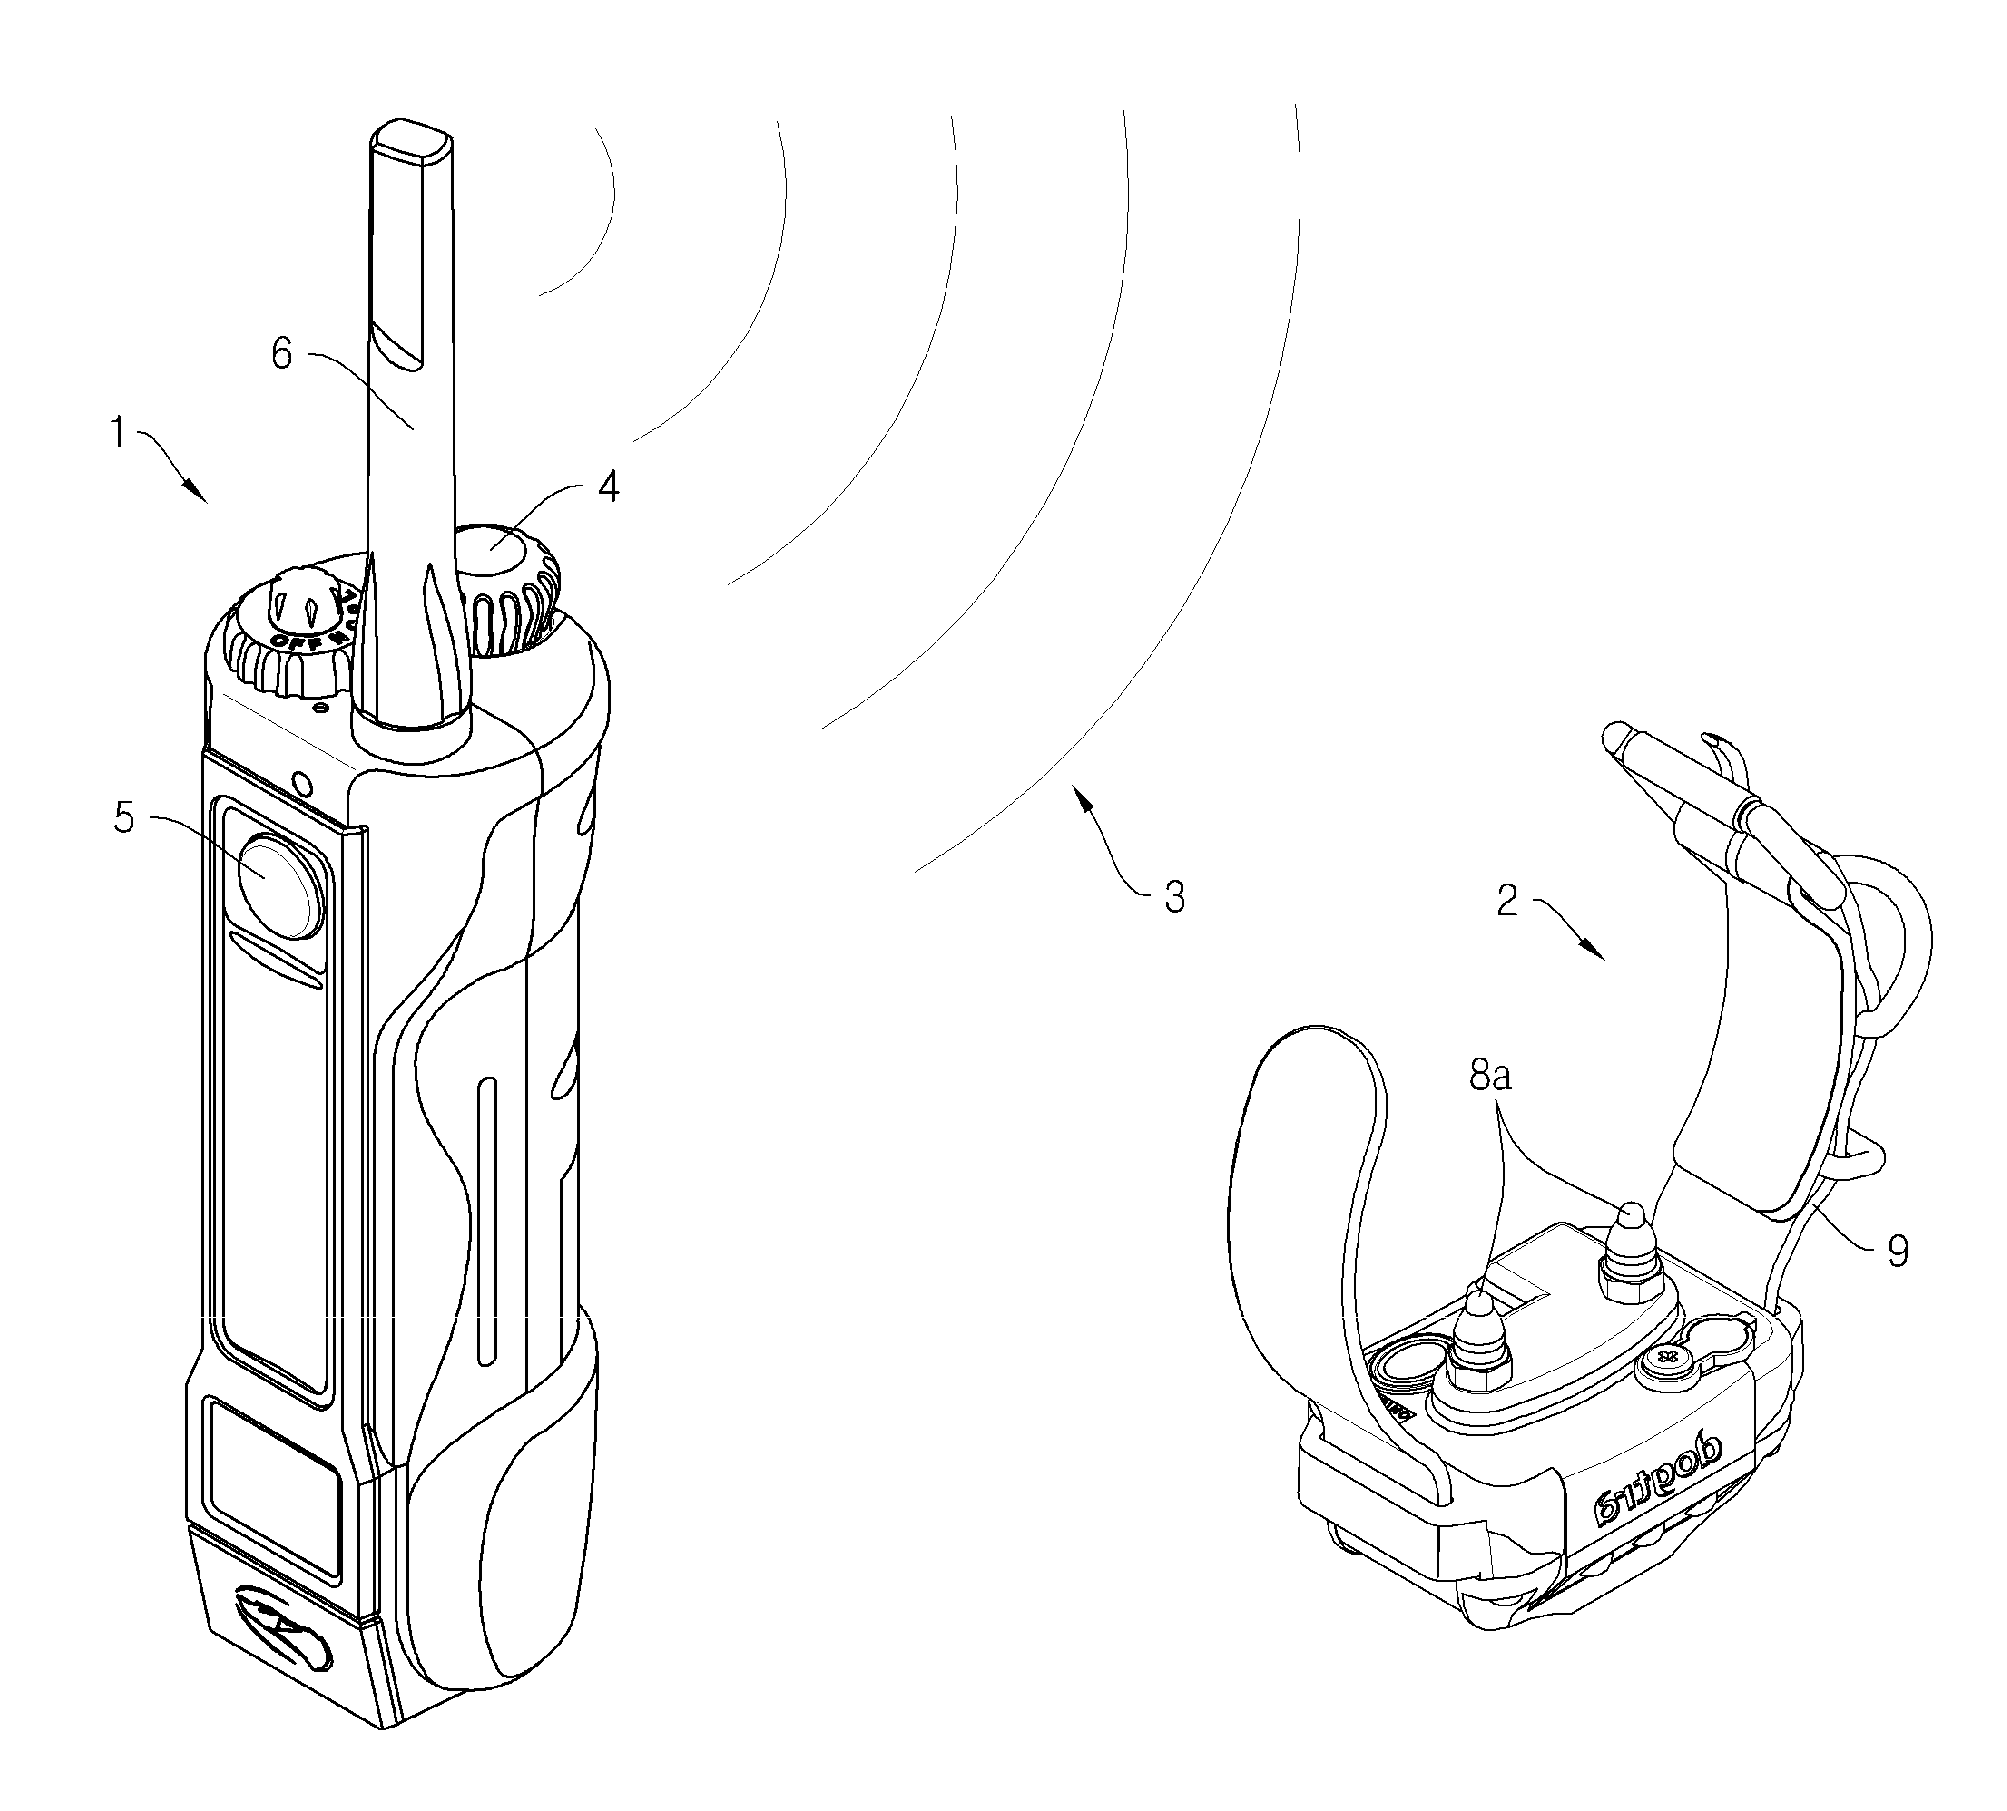 Animal training apparatus having multiple receivers equipped with light emitting units